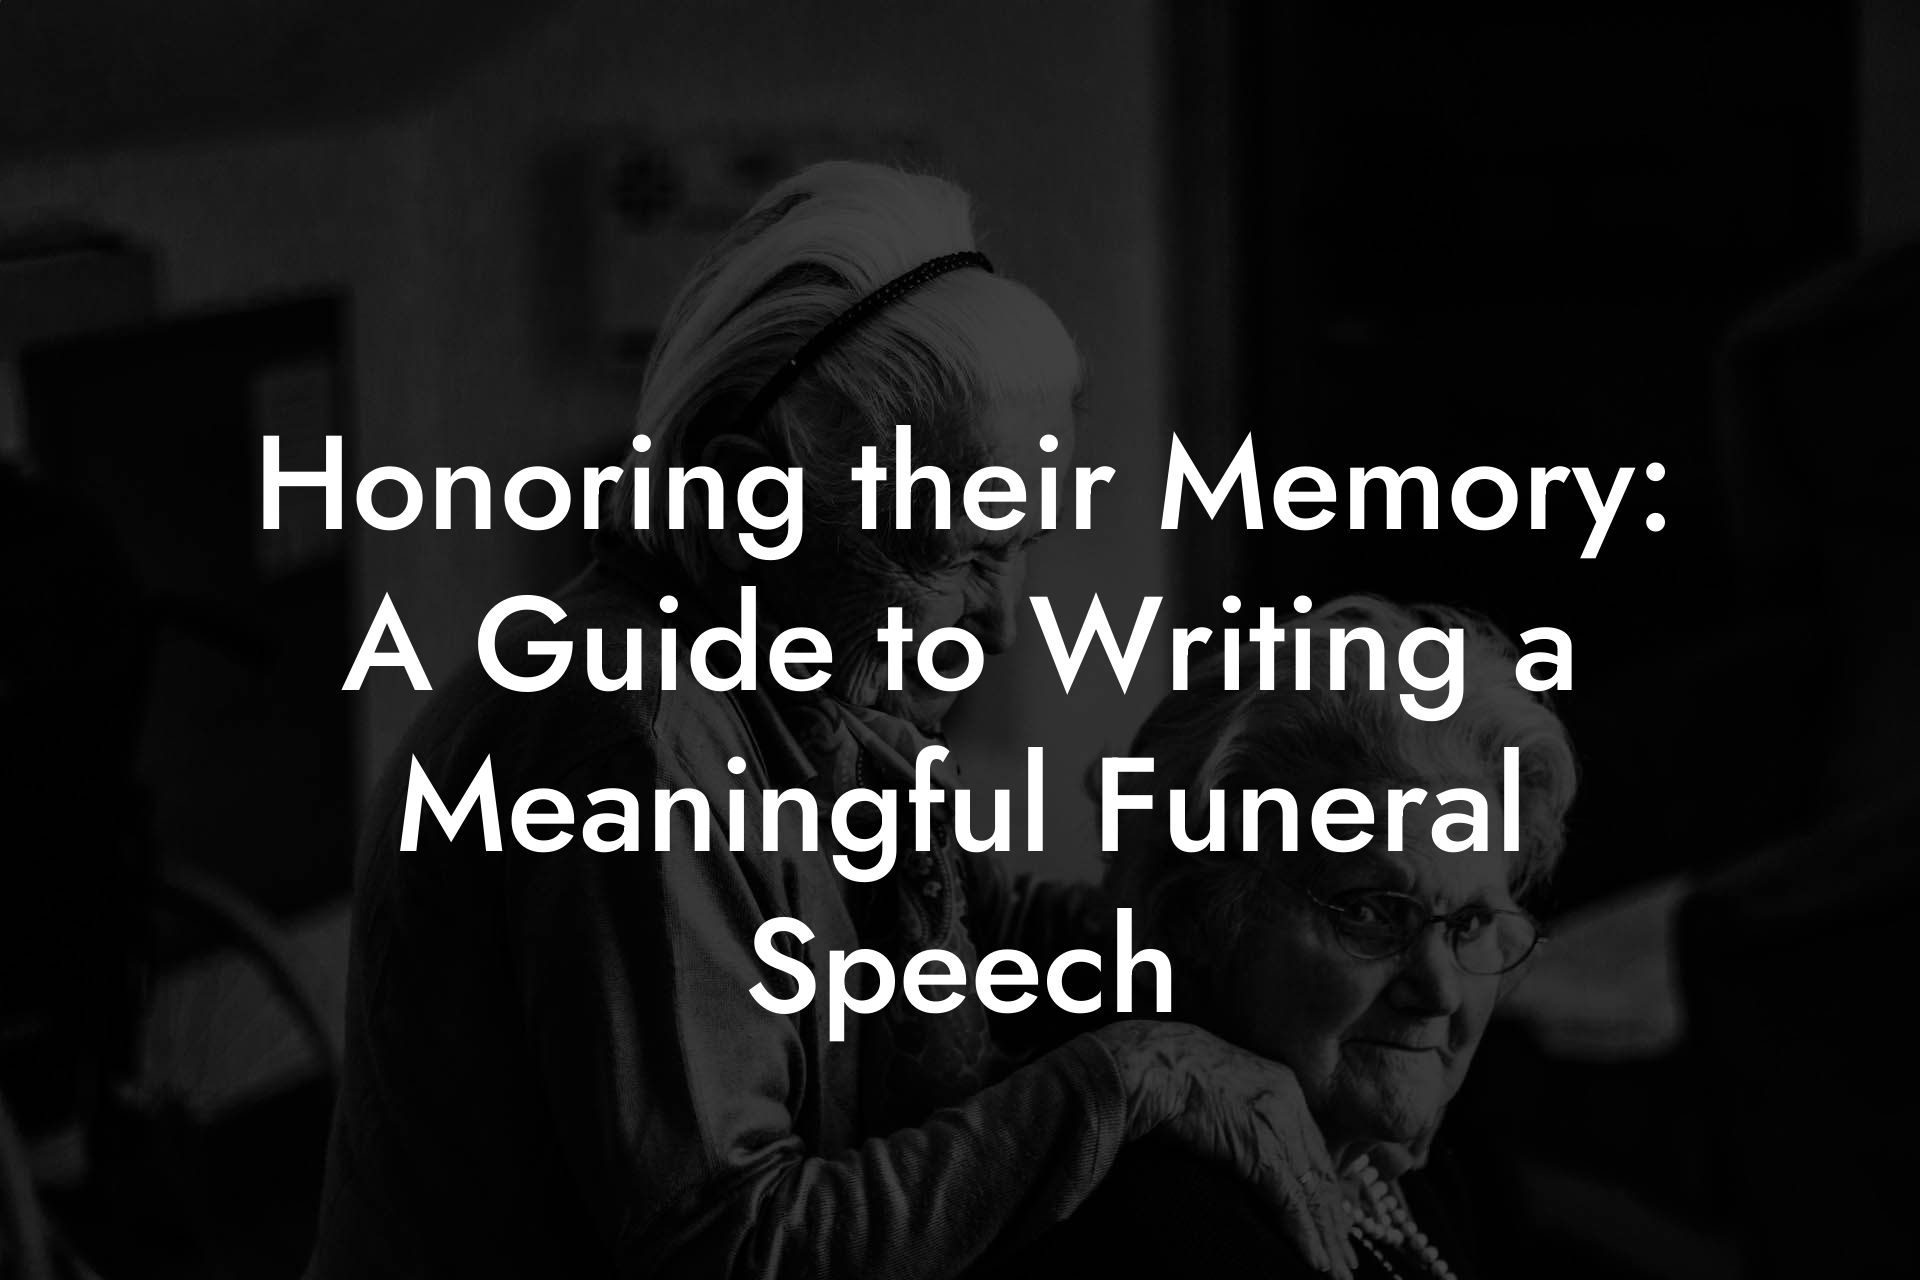 Honoring their Memory: A Guide to Writing a Meaningful Funeral Speech